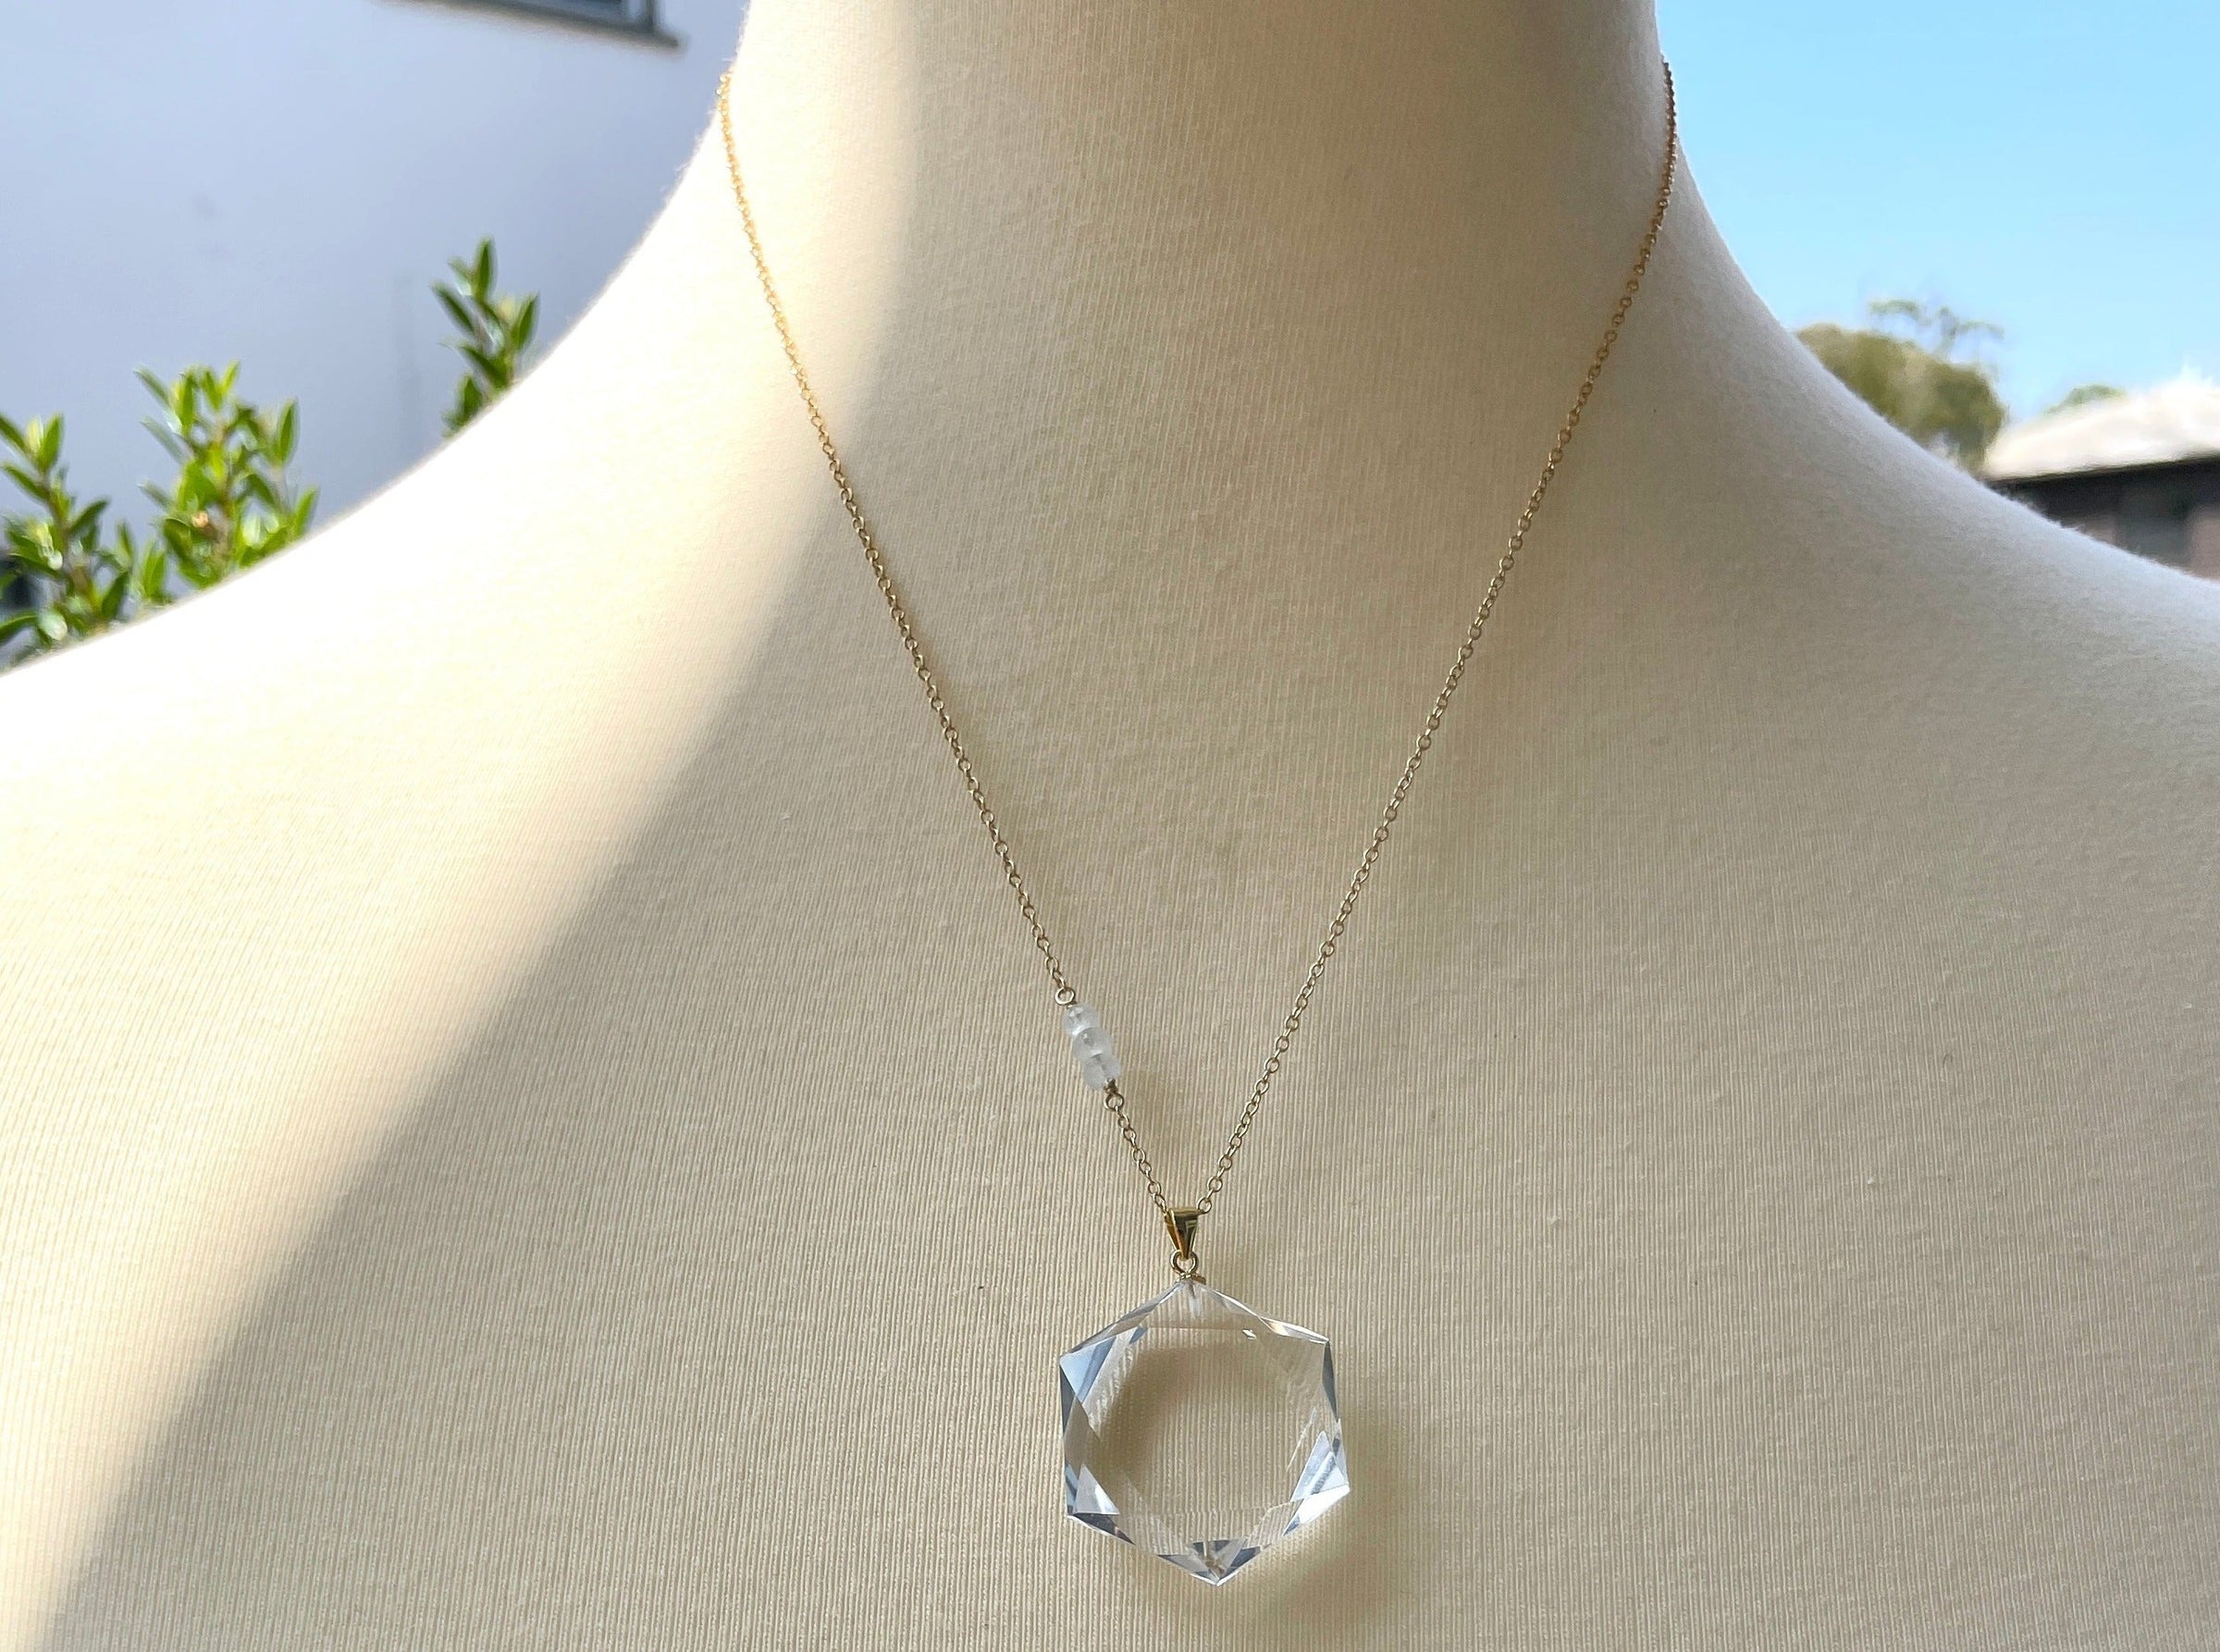 Clear Quartz Hexagon Crystal Necklace - choose sterling silver or gold filled | Stone Love Collection necklace Amanda K Lockrow